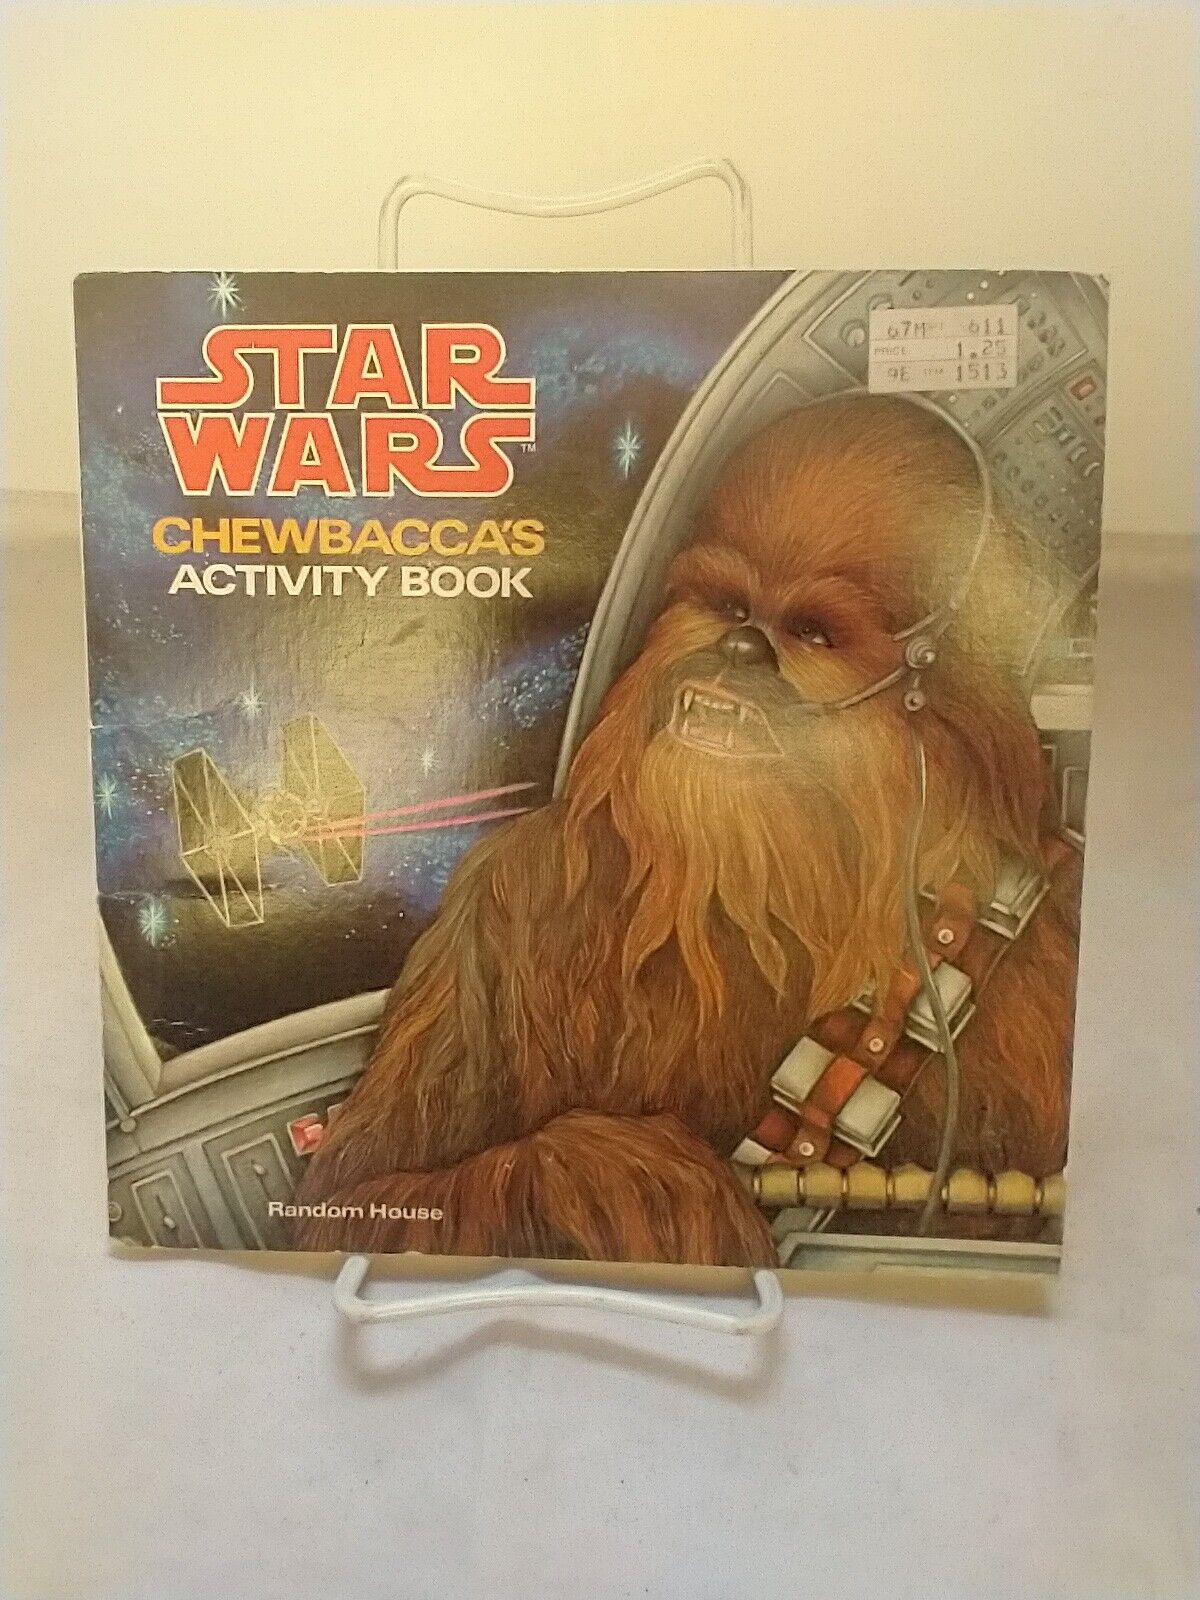 Star Wars Chewbacca's Activity Book Vintage Used